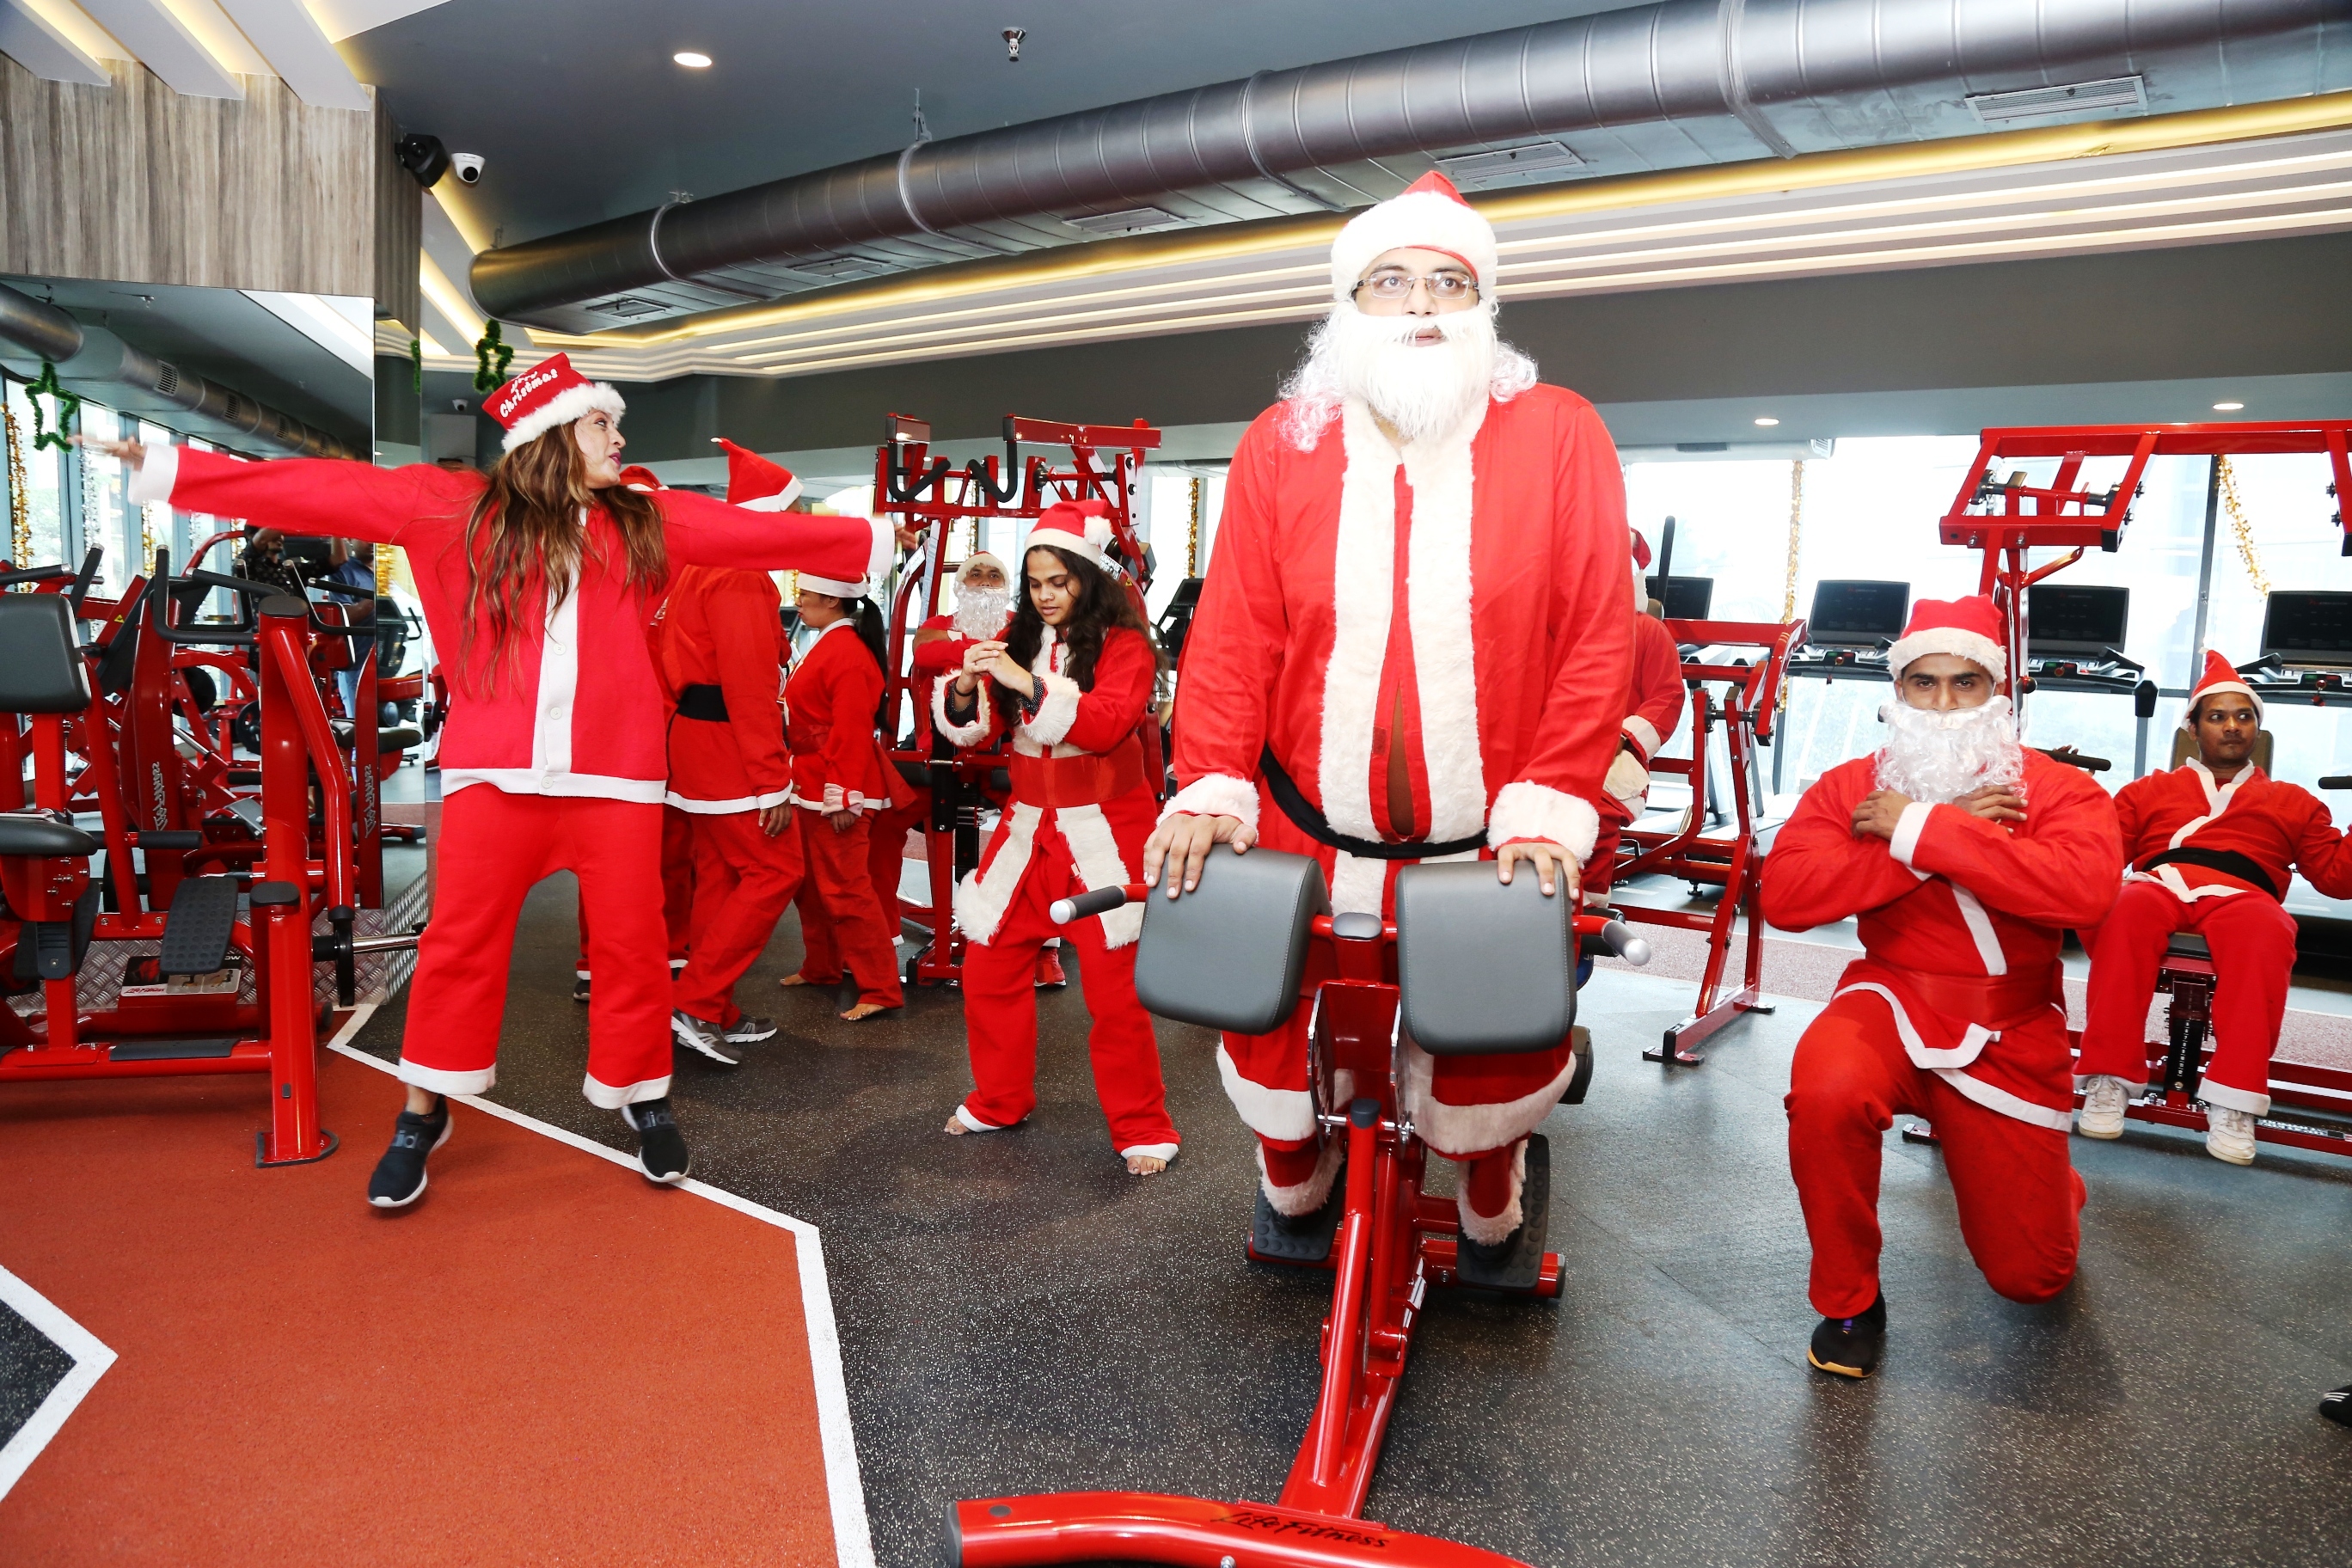 THANE: 24th December, (GPN): Santa’s unique New Year ‘Fitness’ Gift: Santa Clauses fired the Gym floor with their rigorous workouts at R360, Thane’s premium, new-age Gym to spread the message of fitness and bodybuilding, in Mumbai – Photo By Sachin Murdeshwar GPN